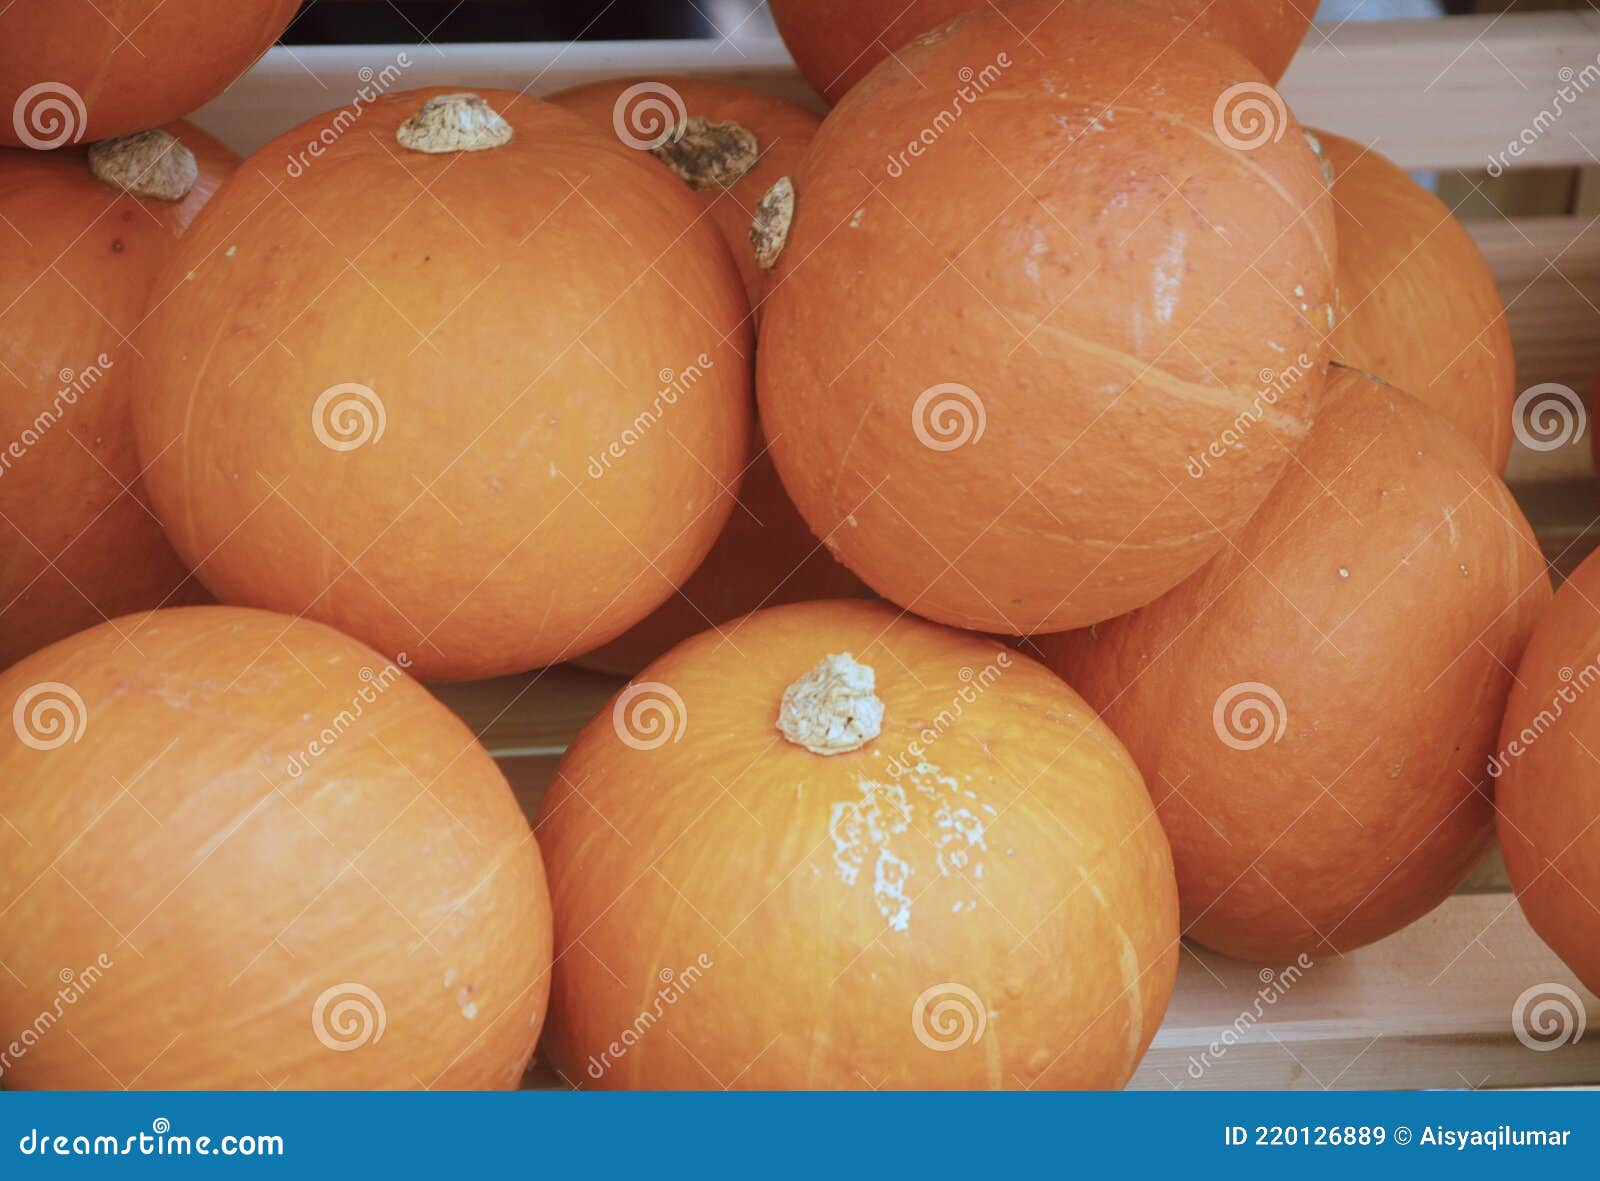 cantaloupe or rock melon fruit or the scientific name is cucumis melo var. cantalupo.